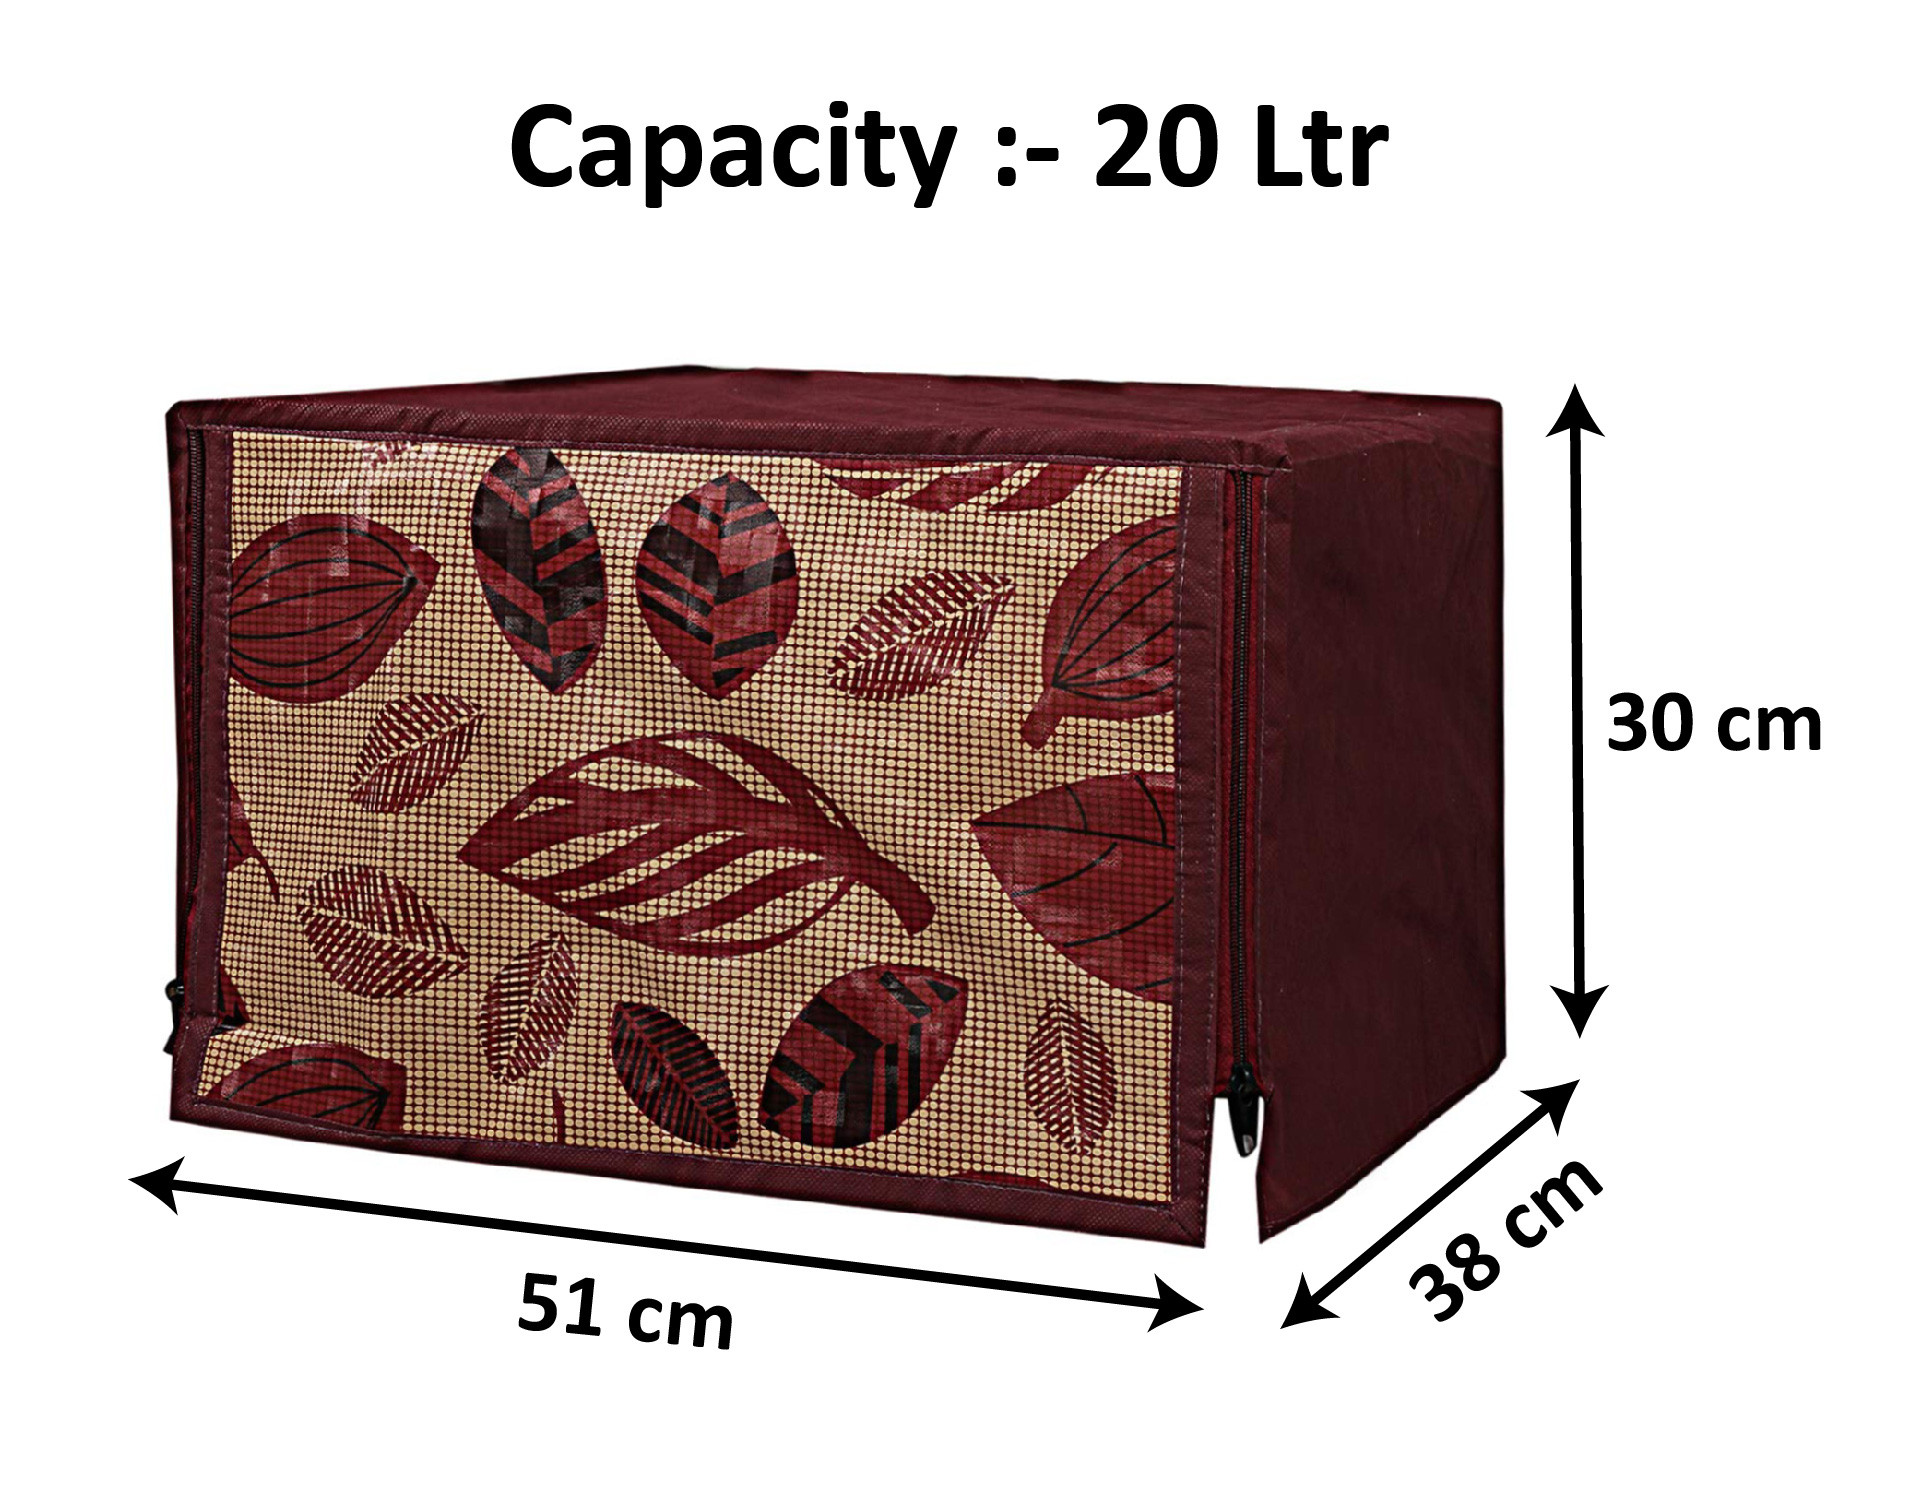 Kuber Industries PVC Leaf Printed Microwave Oven Cover,20 Ltr. (Brown)-HS43KUBMART25961